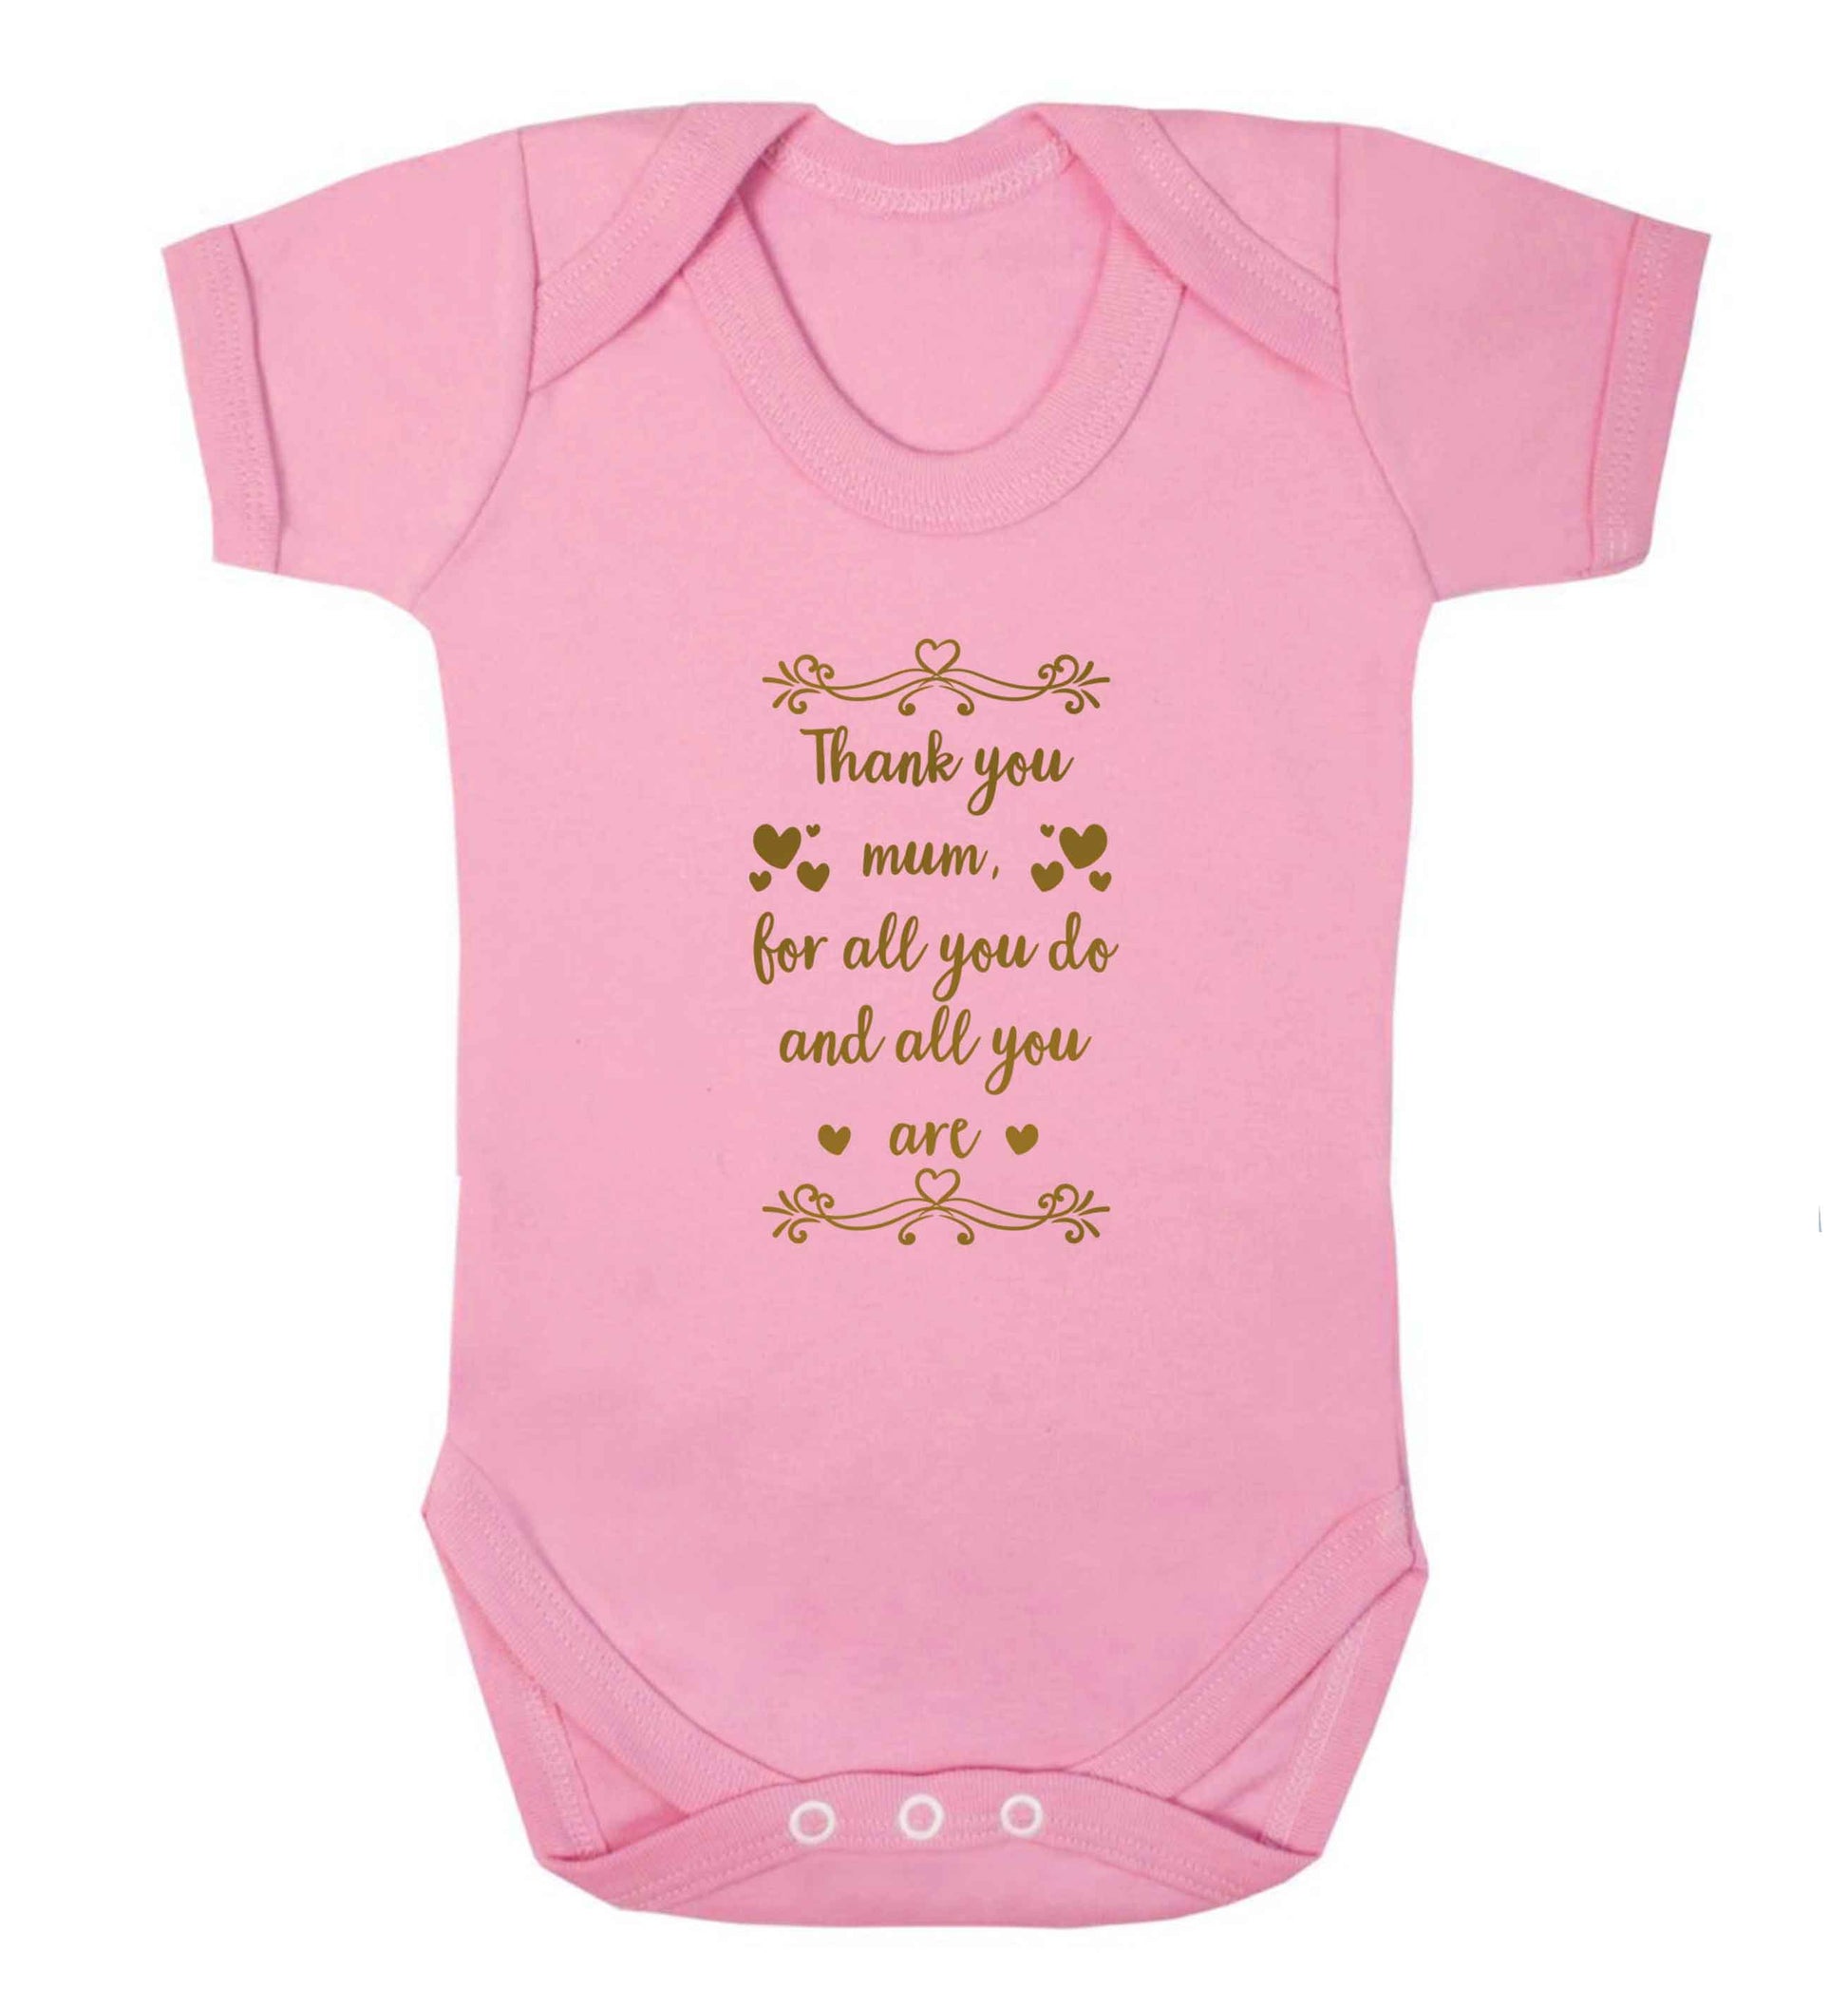 Gorgeous gifts for mums on mother's day! Thank you mum for all you do and all you are baby vest pale pink 18-24 months